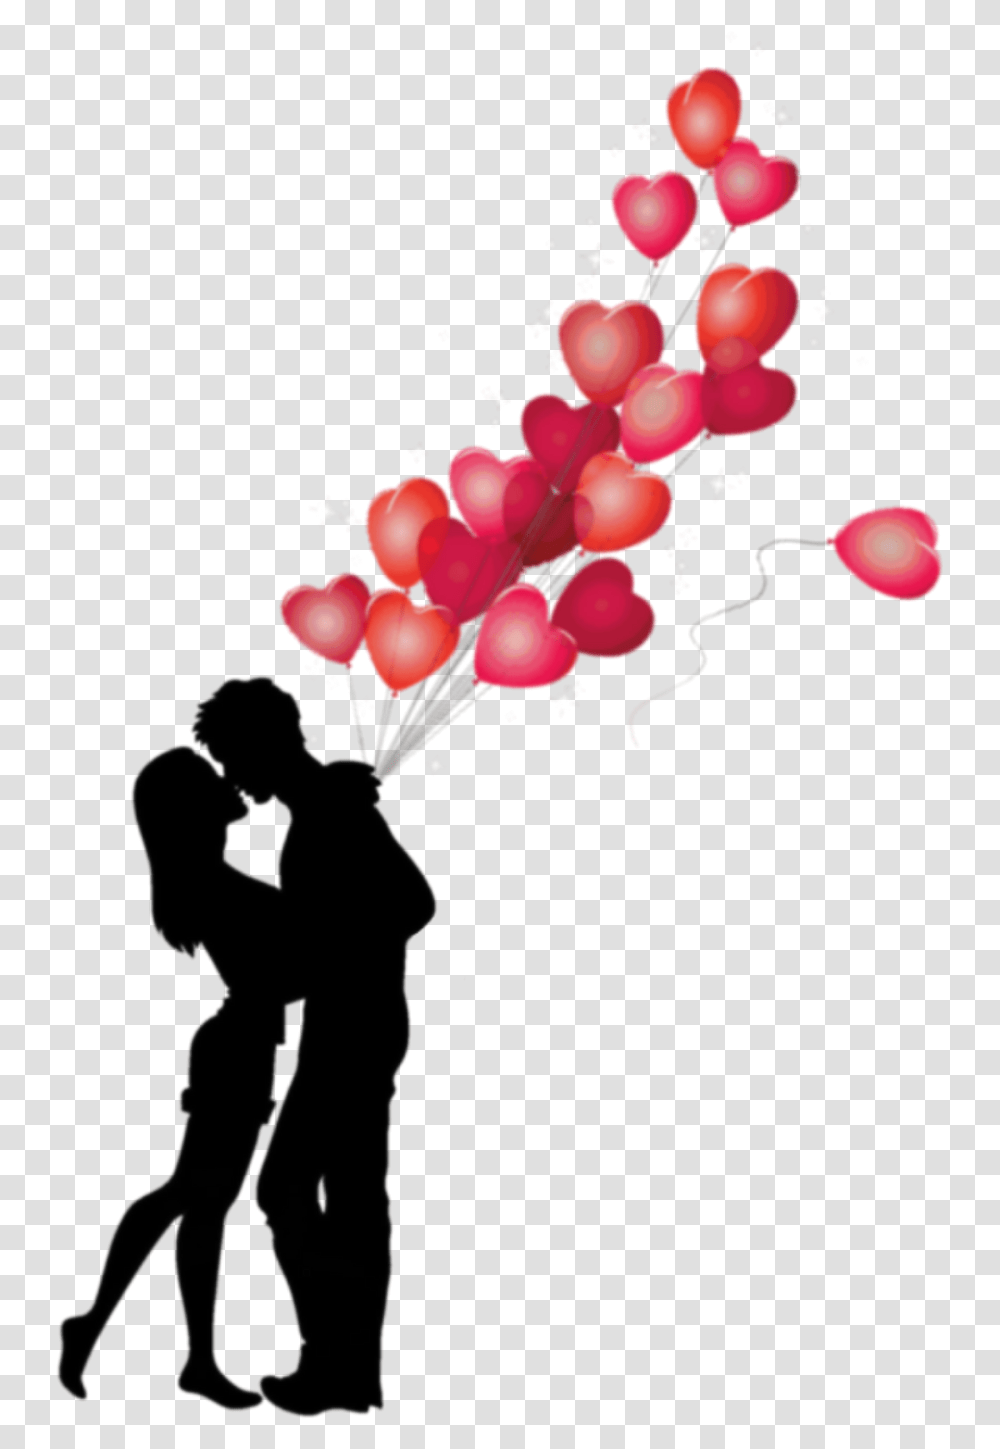 Love Hearts Silhouette Romantic Love Hd, Balloon, Plant, Person, Human Transparent Png